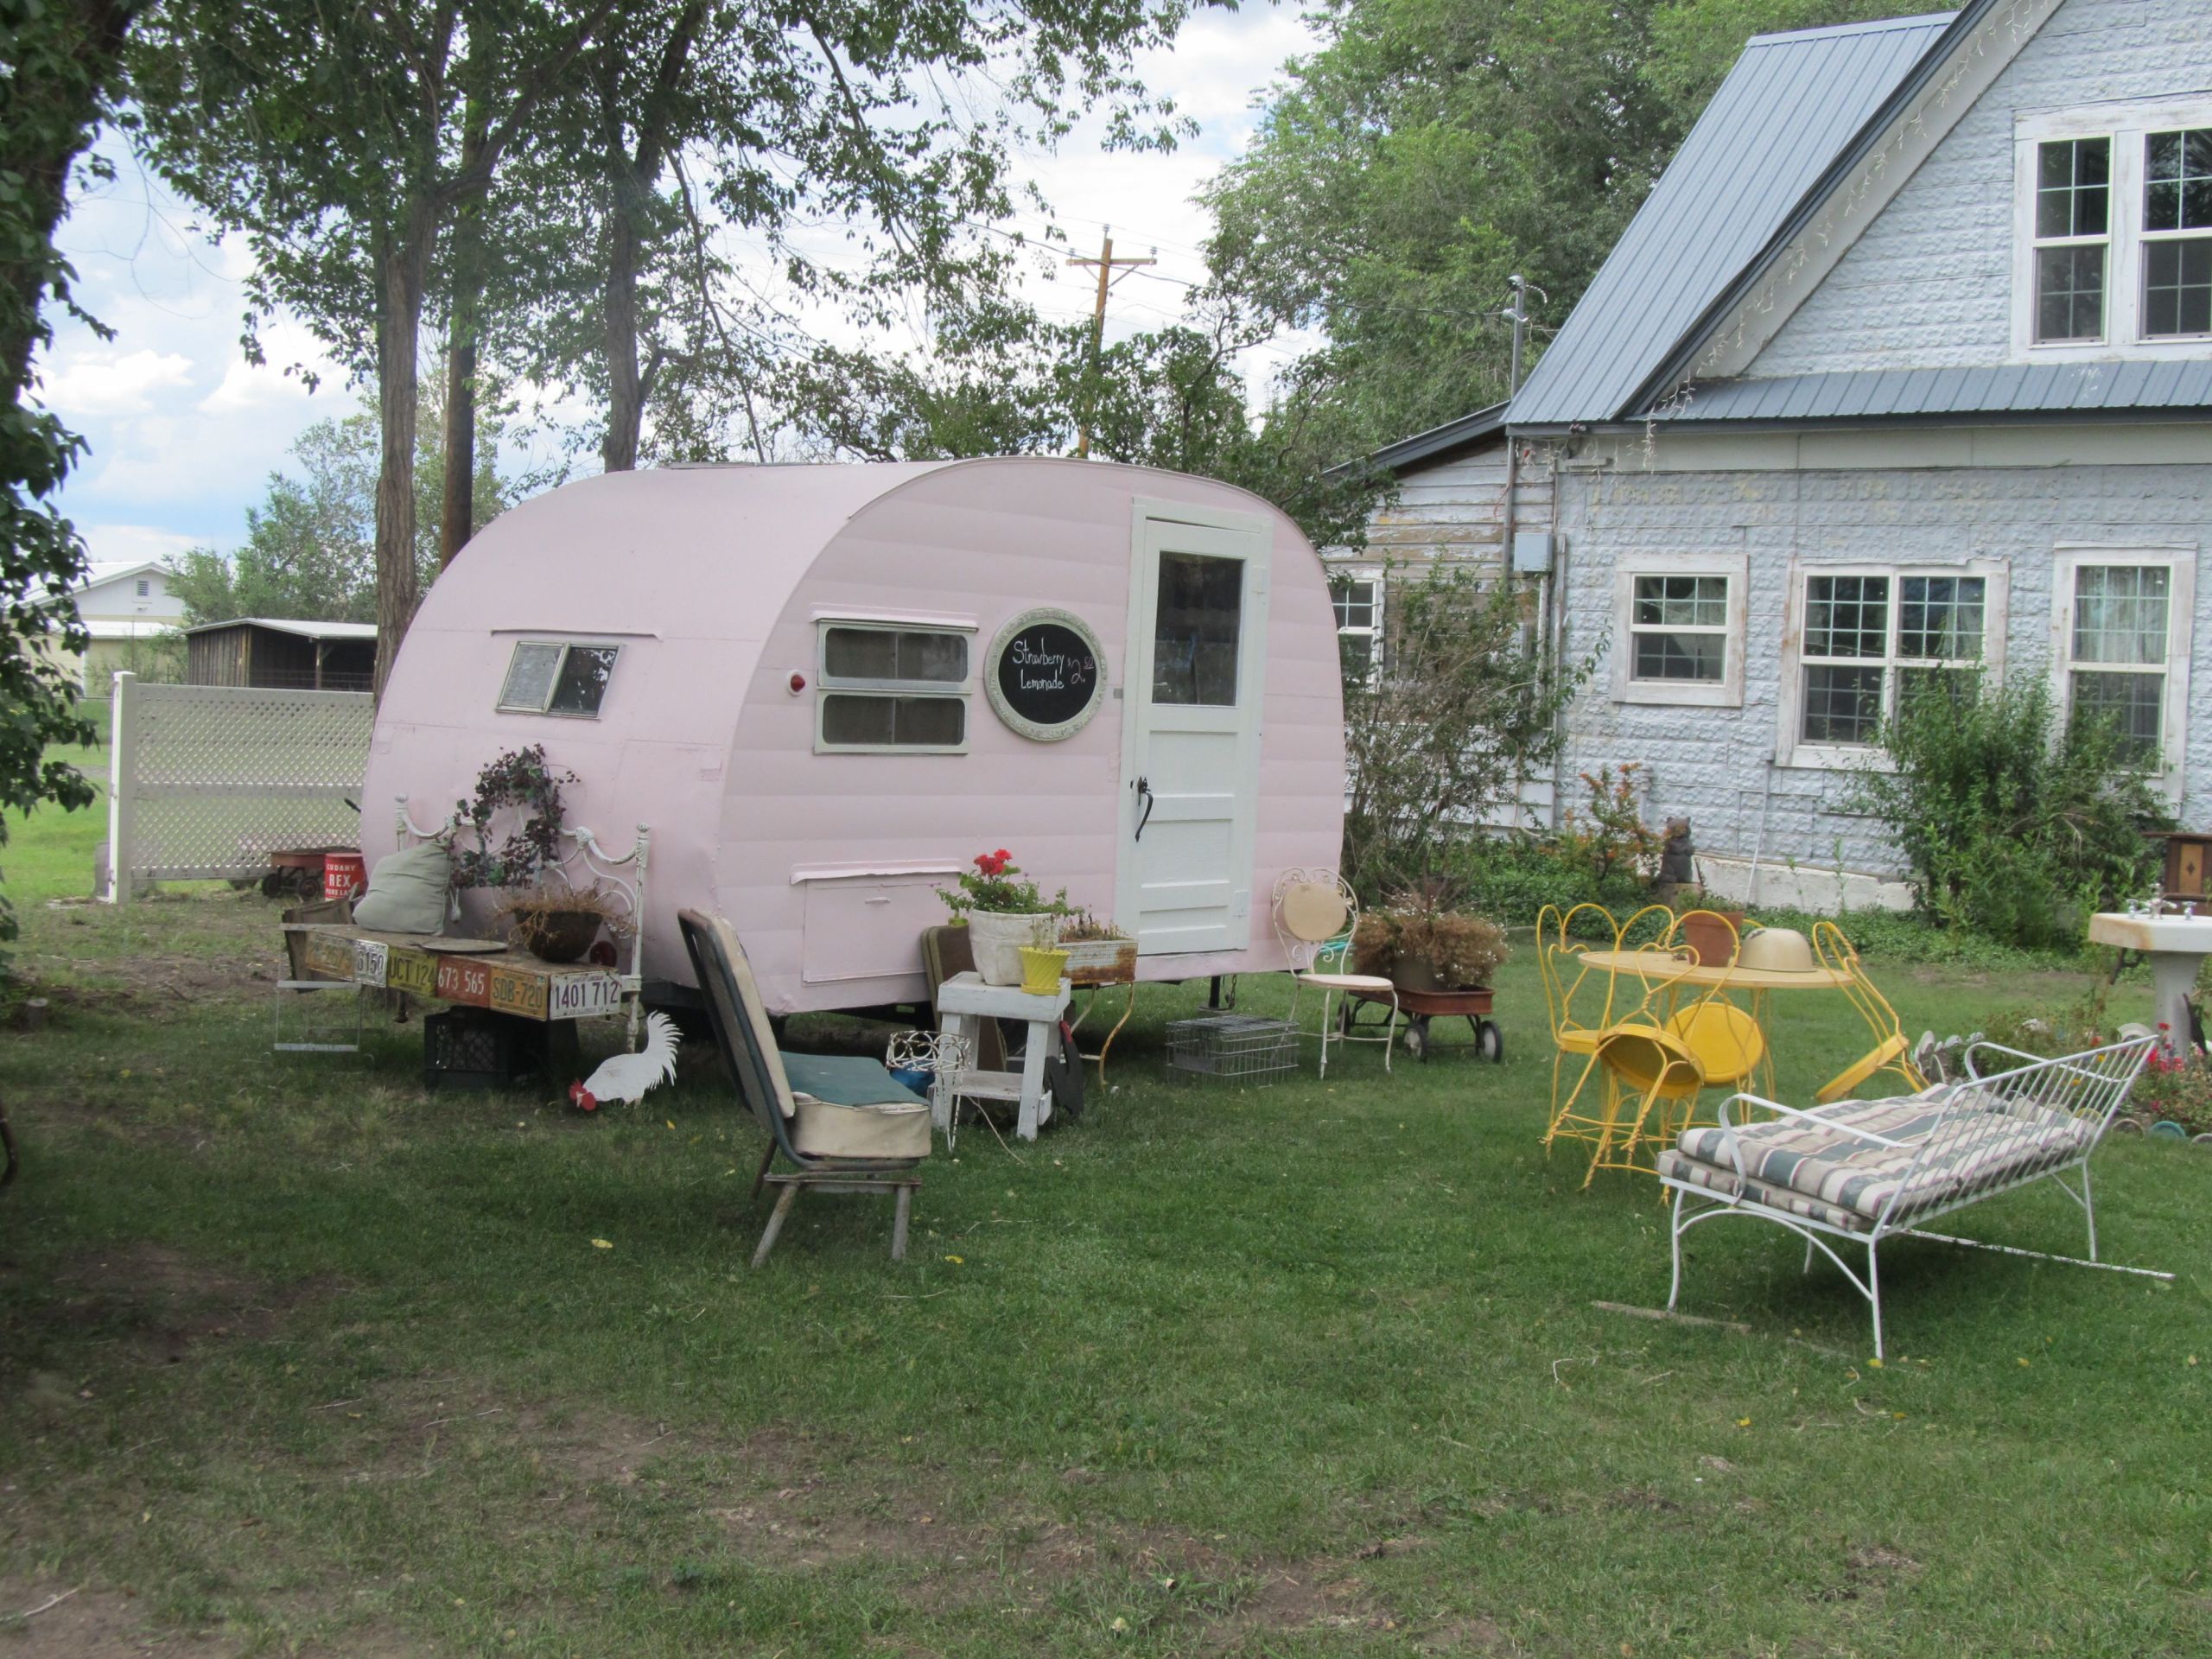 Parking Rv In Backyard
 Darling little camper turned into guest cottage and